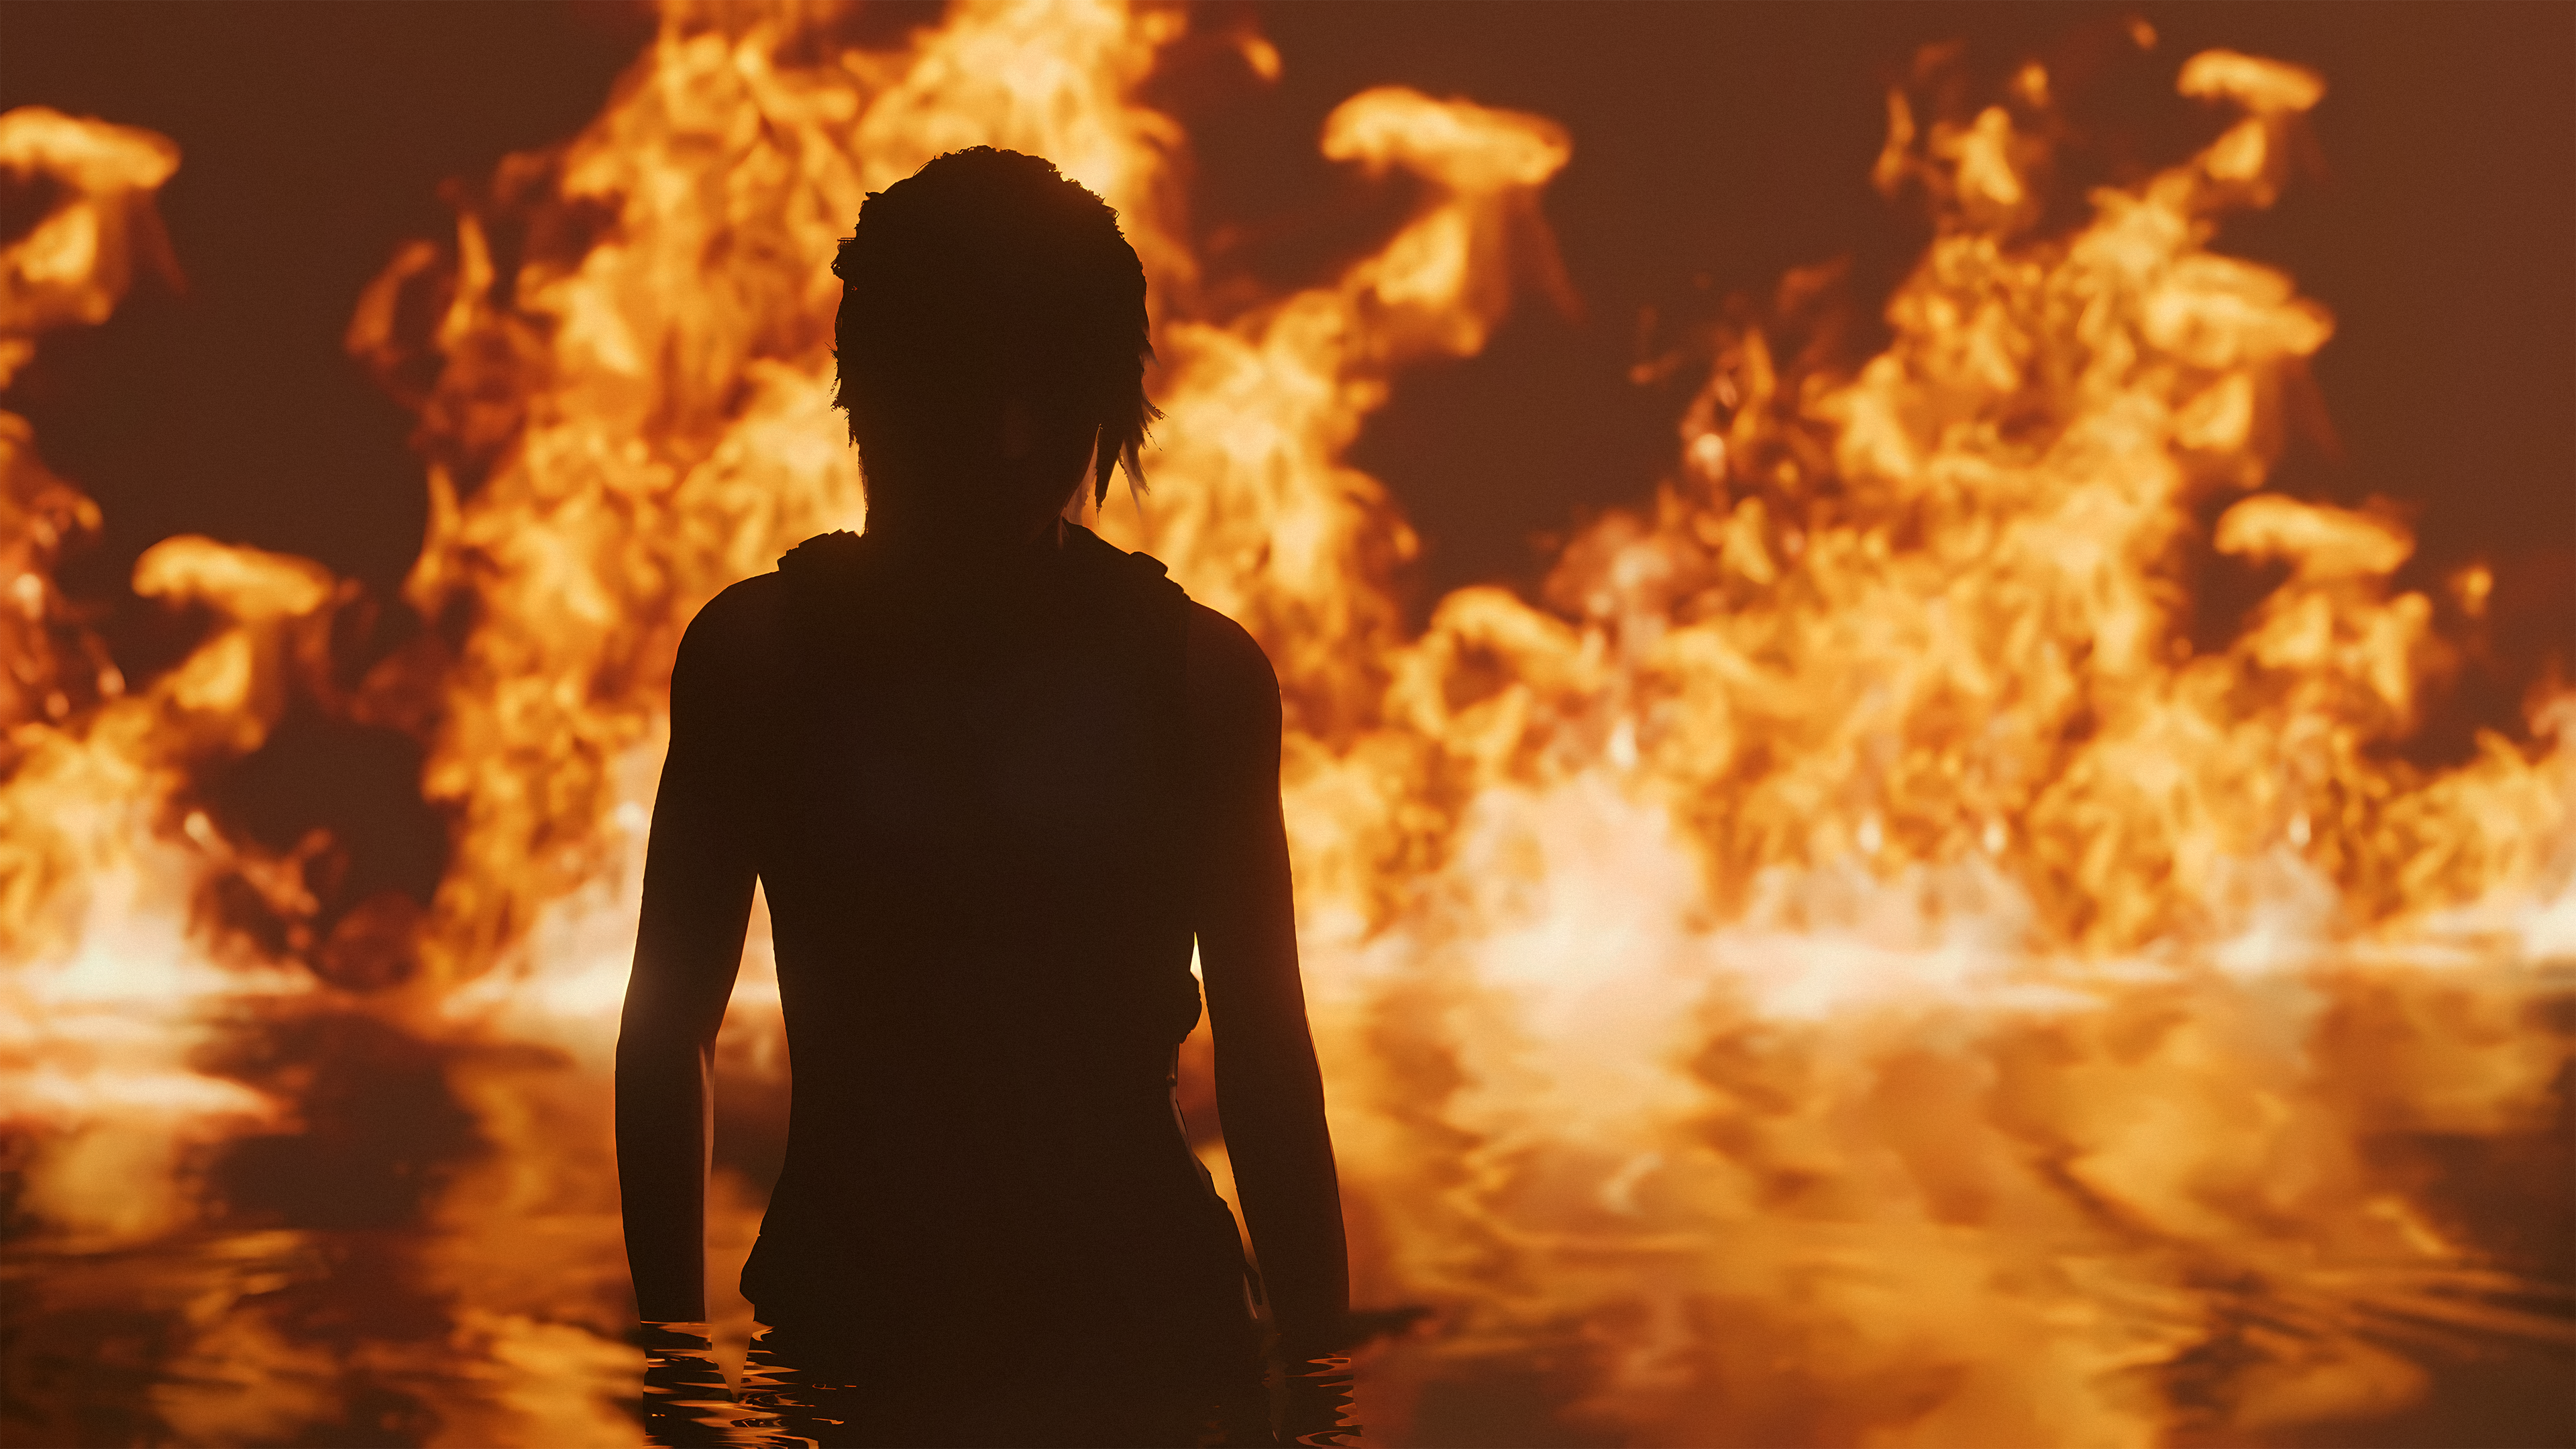 General 3840x2160 Lara Croft (Tomb Raider) Tomb Raider (Movies) fire video game art water video game characters standing in water CGI silhouette video games